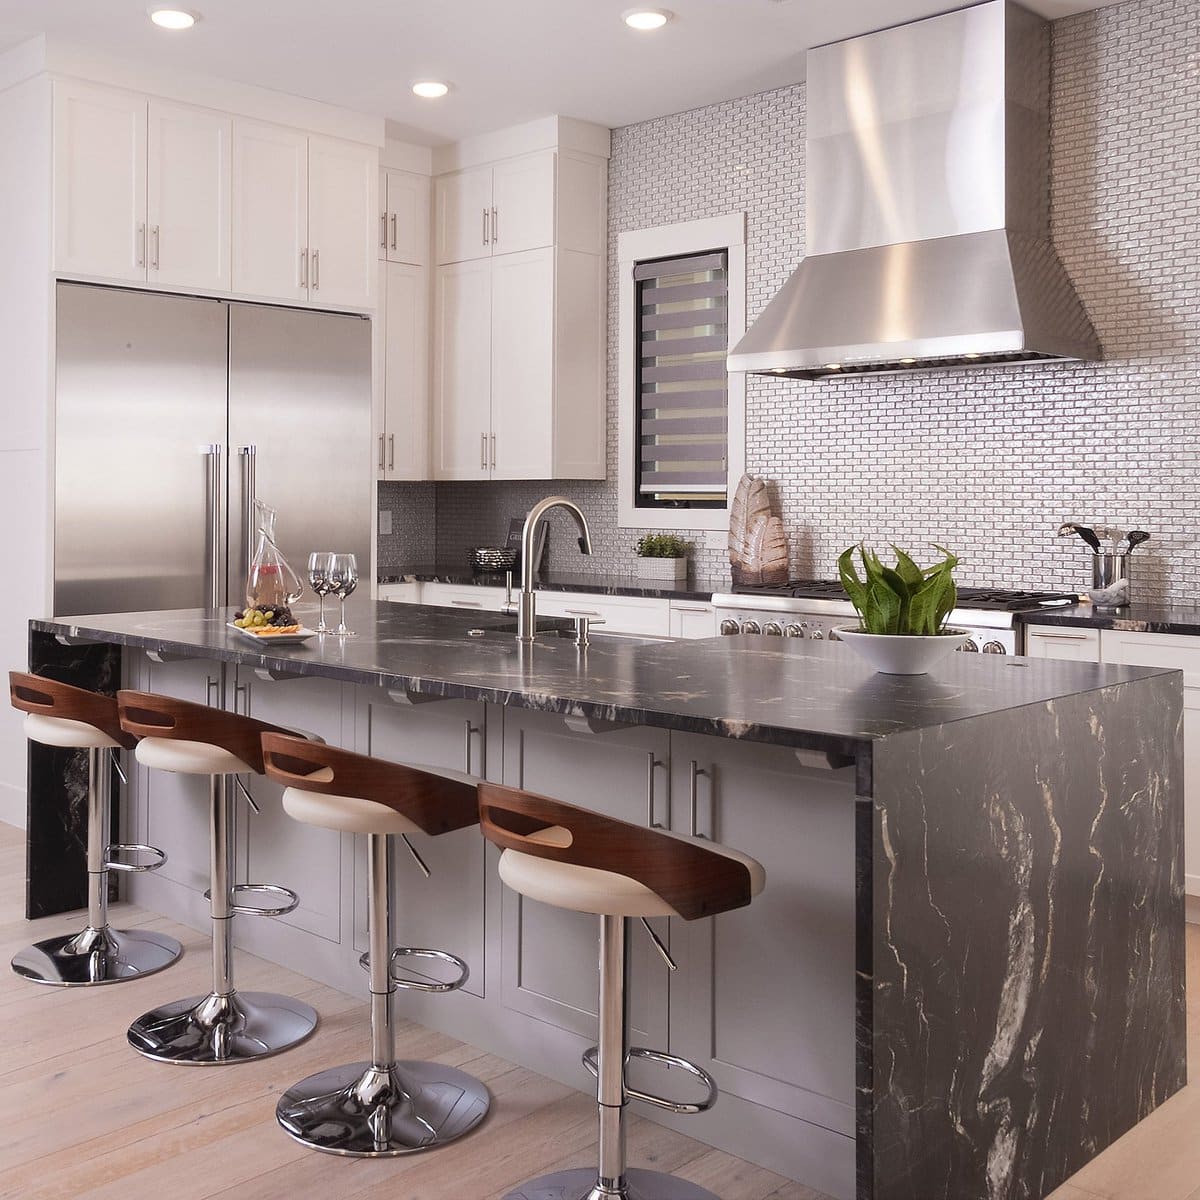 The best quality kitchen countertops in Salt Lake City - Accent Countertops